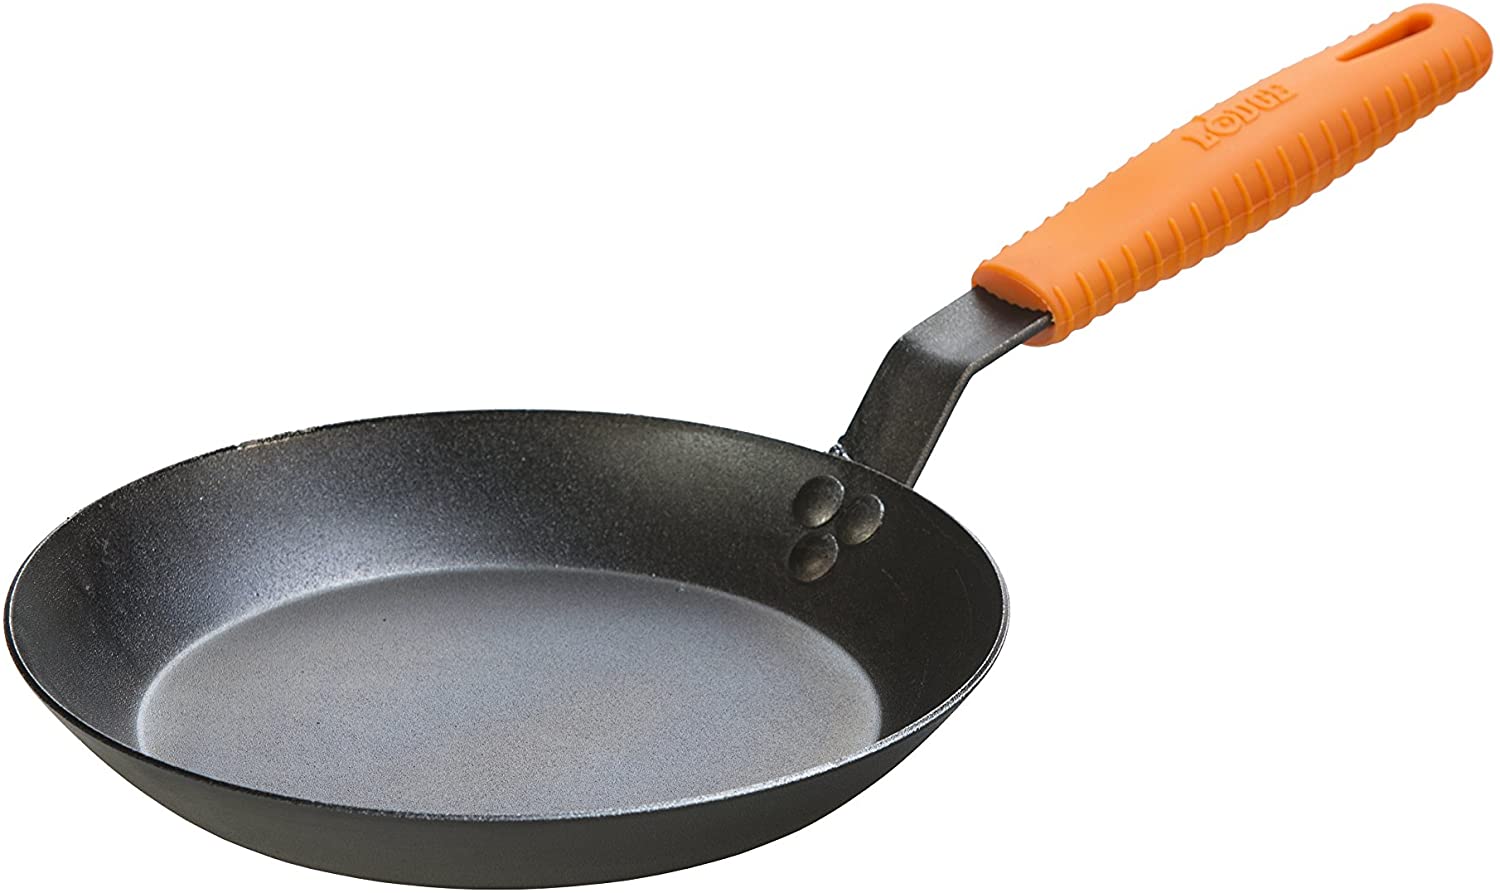 Lodge - 10 Inch Seasoned Carbon Steel Skillet With Orange Silicone Handle Holder